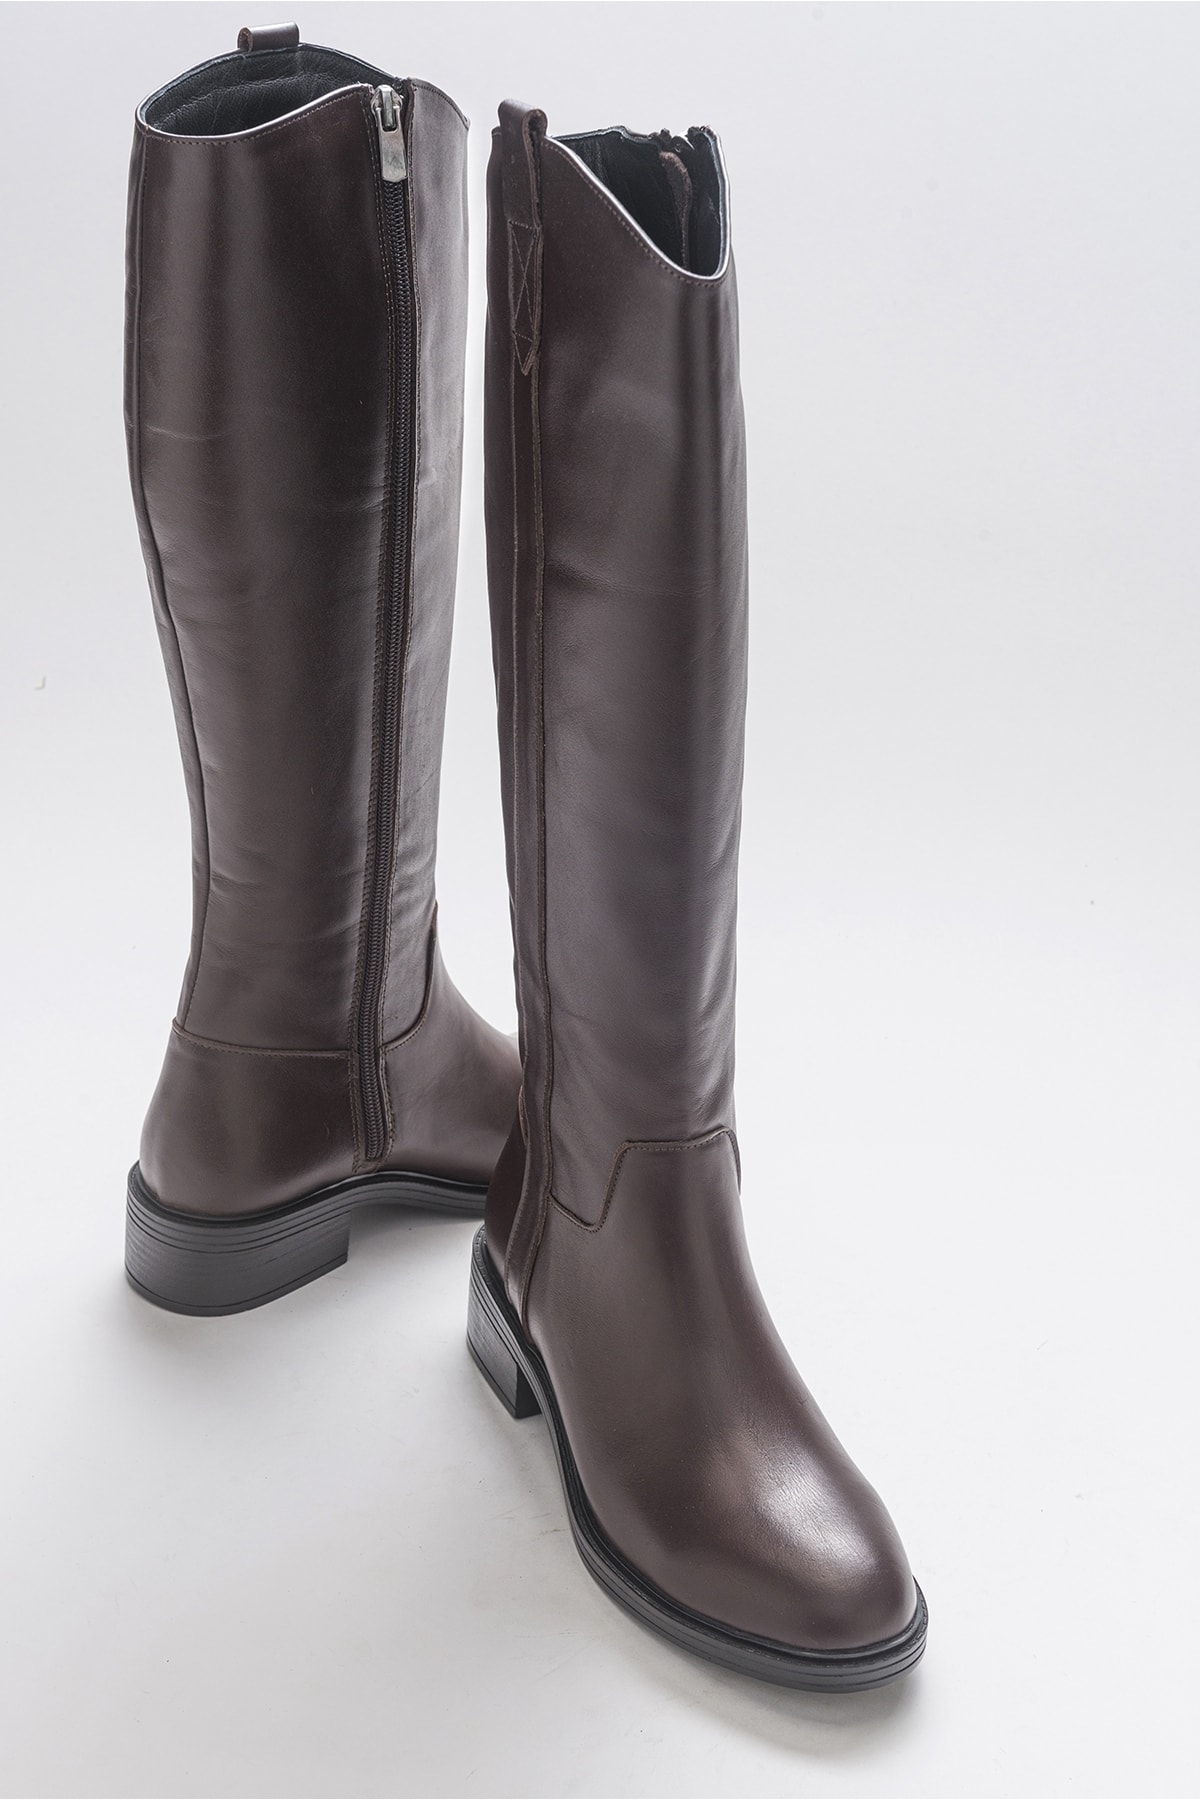 Levně LuviShoes Acro Brown Skin Genuine Leather Women's Boots.